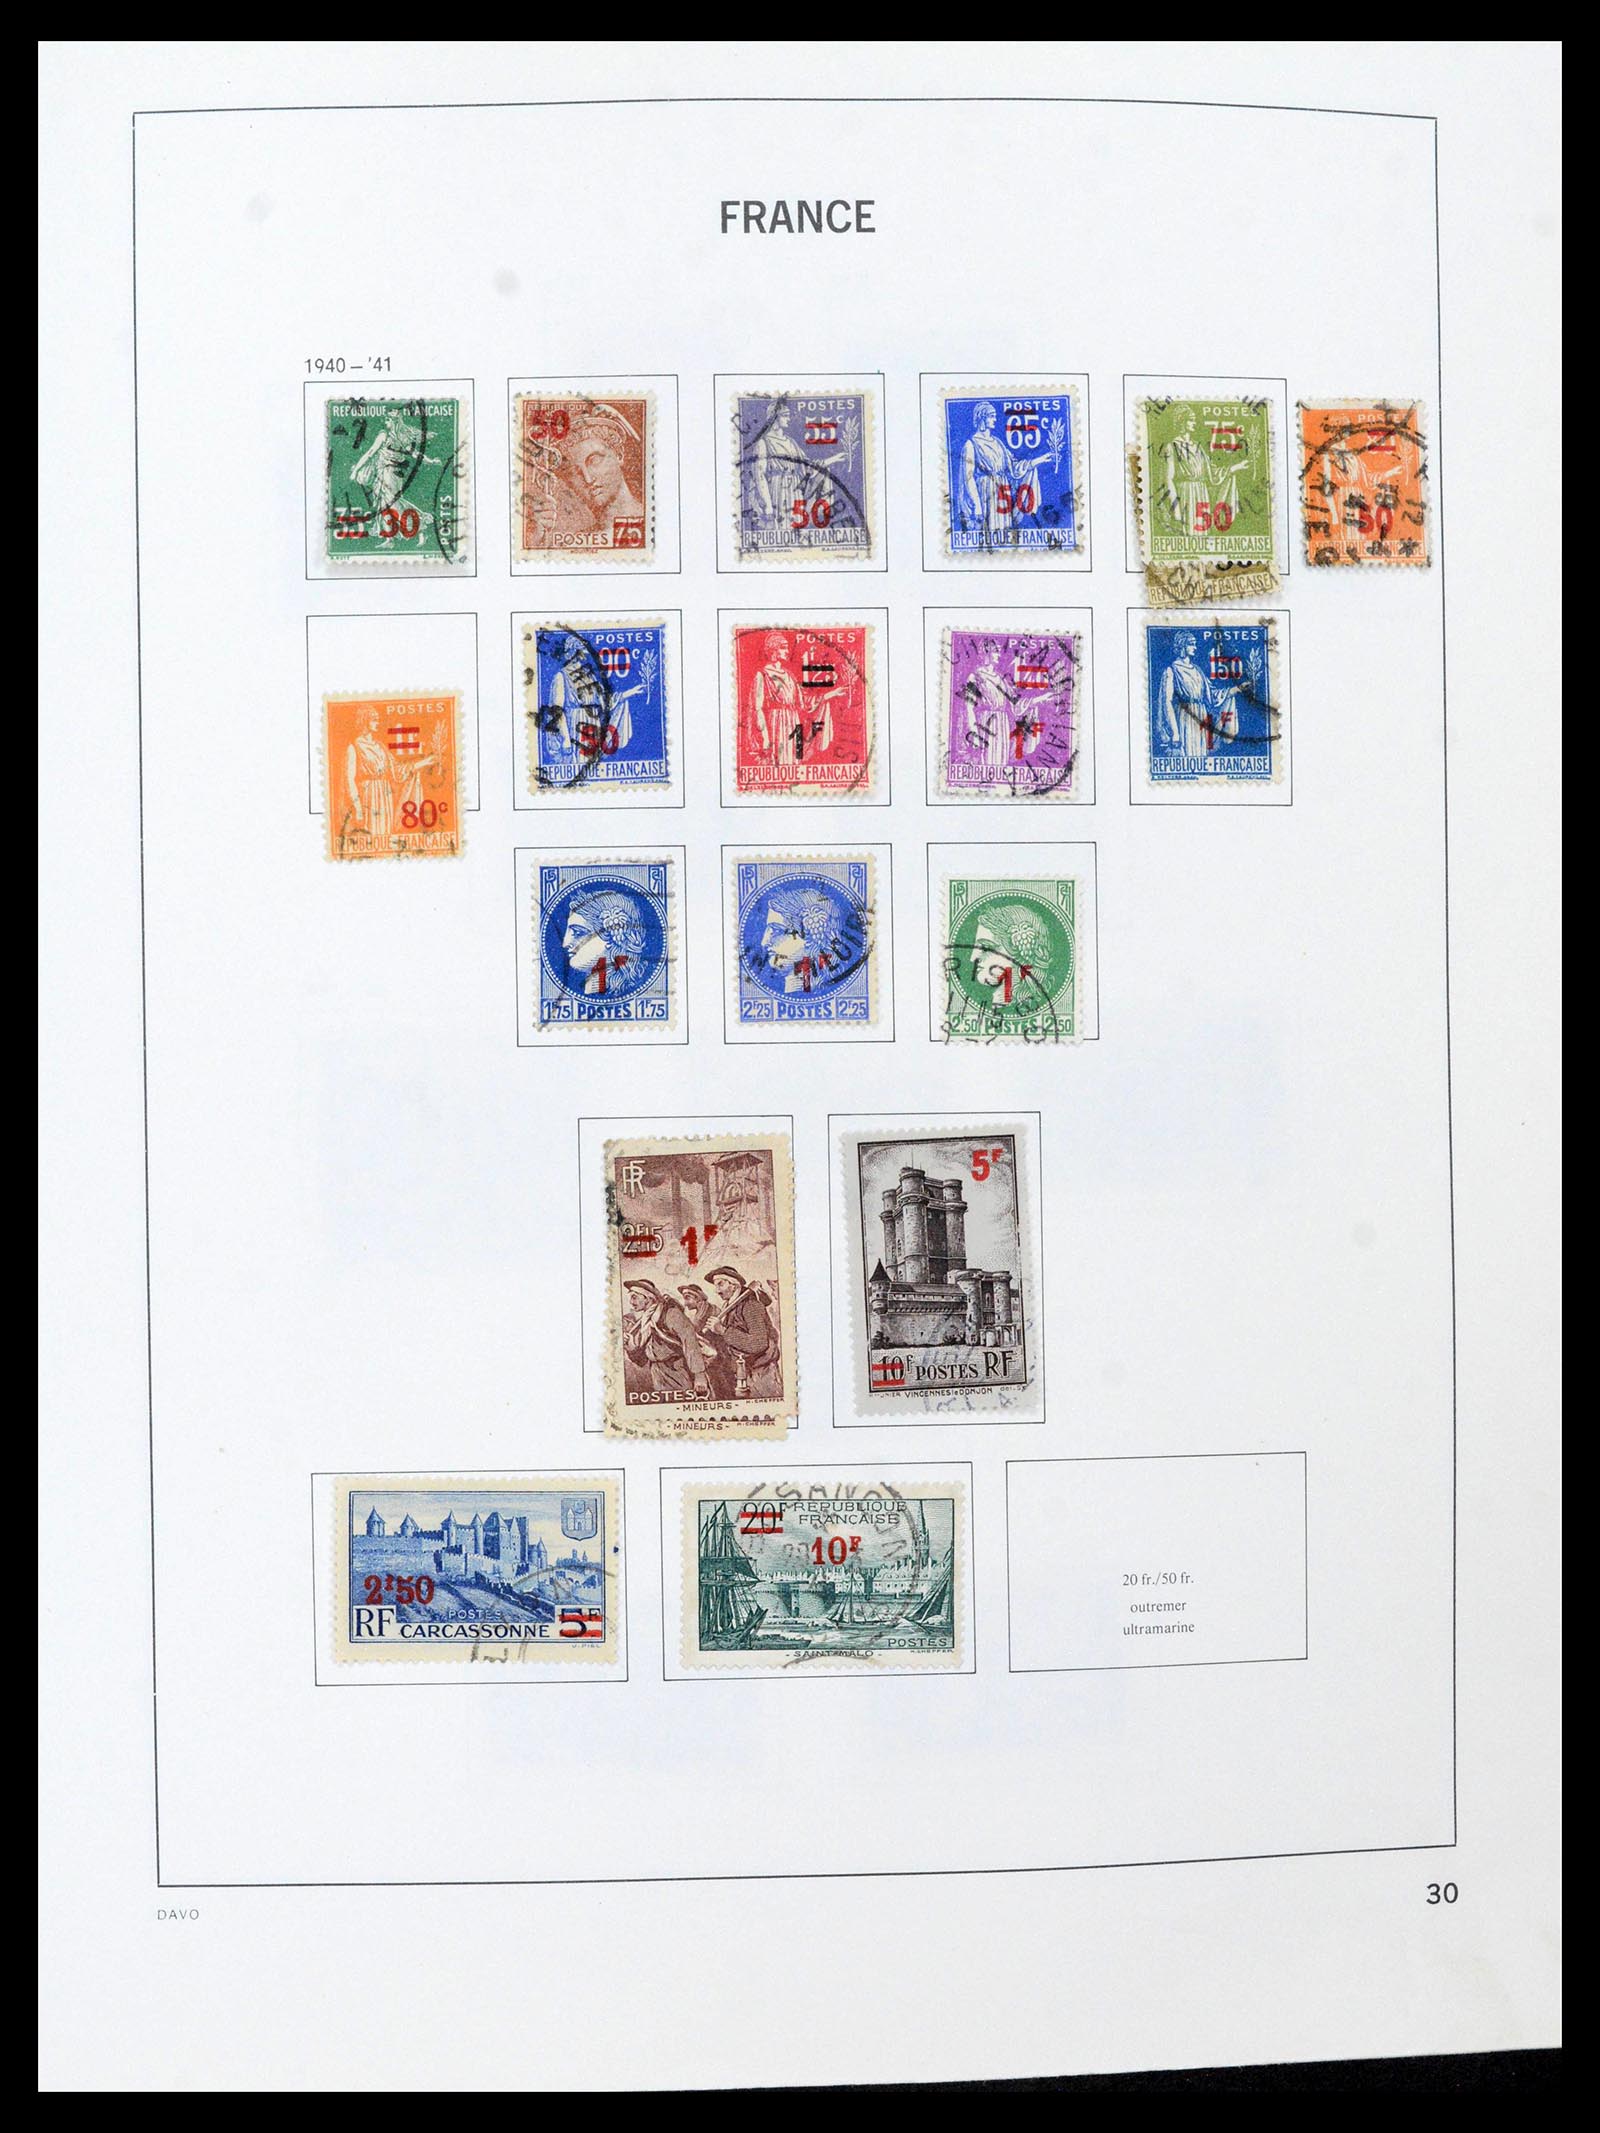 39164 0030 - Stamp collection 39164 France 1849-1981.